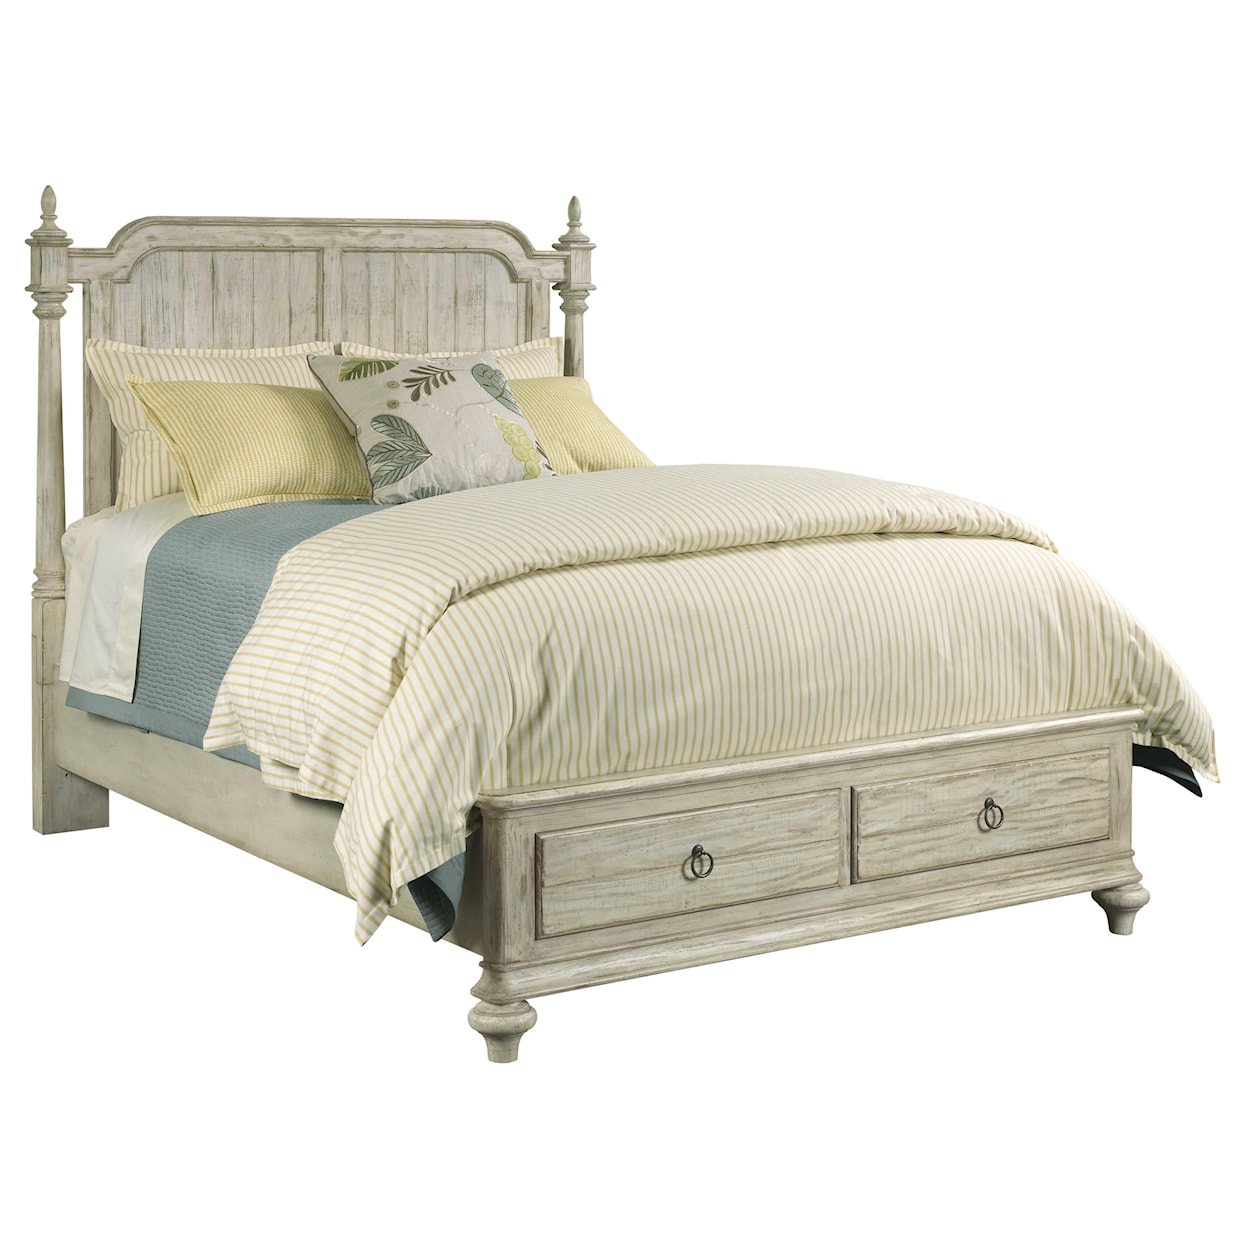 Kincaid Furniture Weatherford King Westland Bed with Storage Footboard